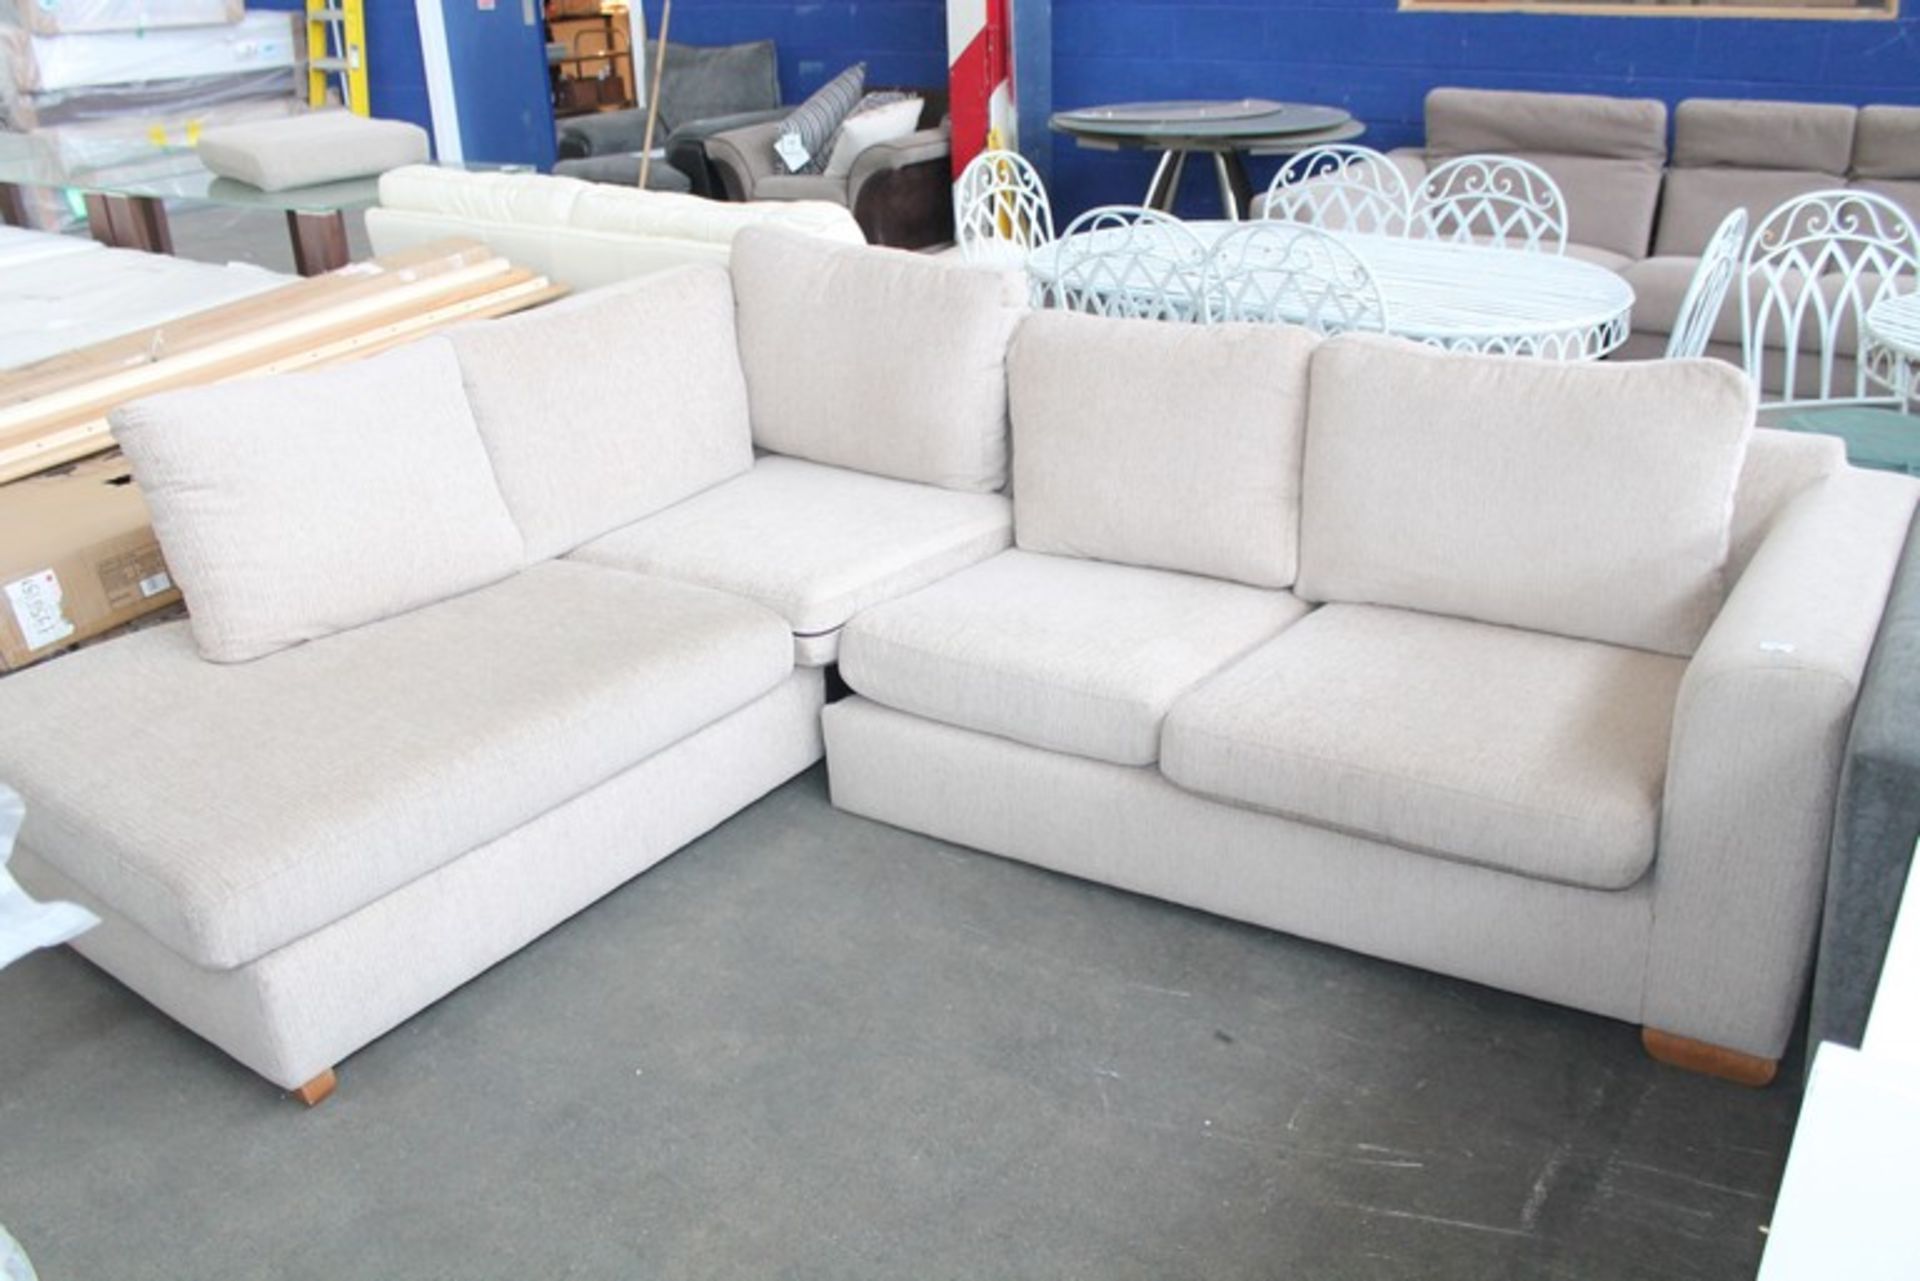 1 x LARGE 3 SEATER LEFT HAND CHAISE BEIGE FABRIC UPHOLSTERED CORNER SOFA   *PLEASE NOTE THAT THE BID